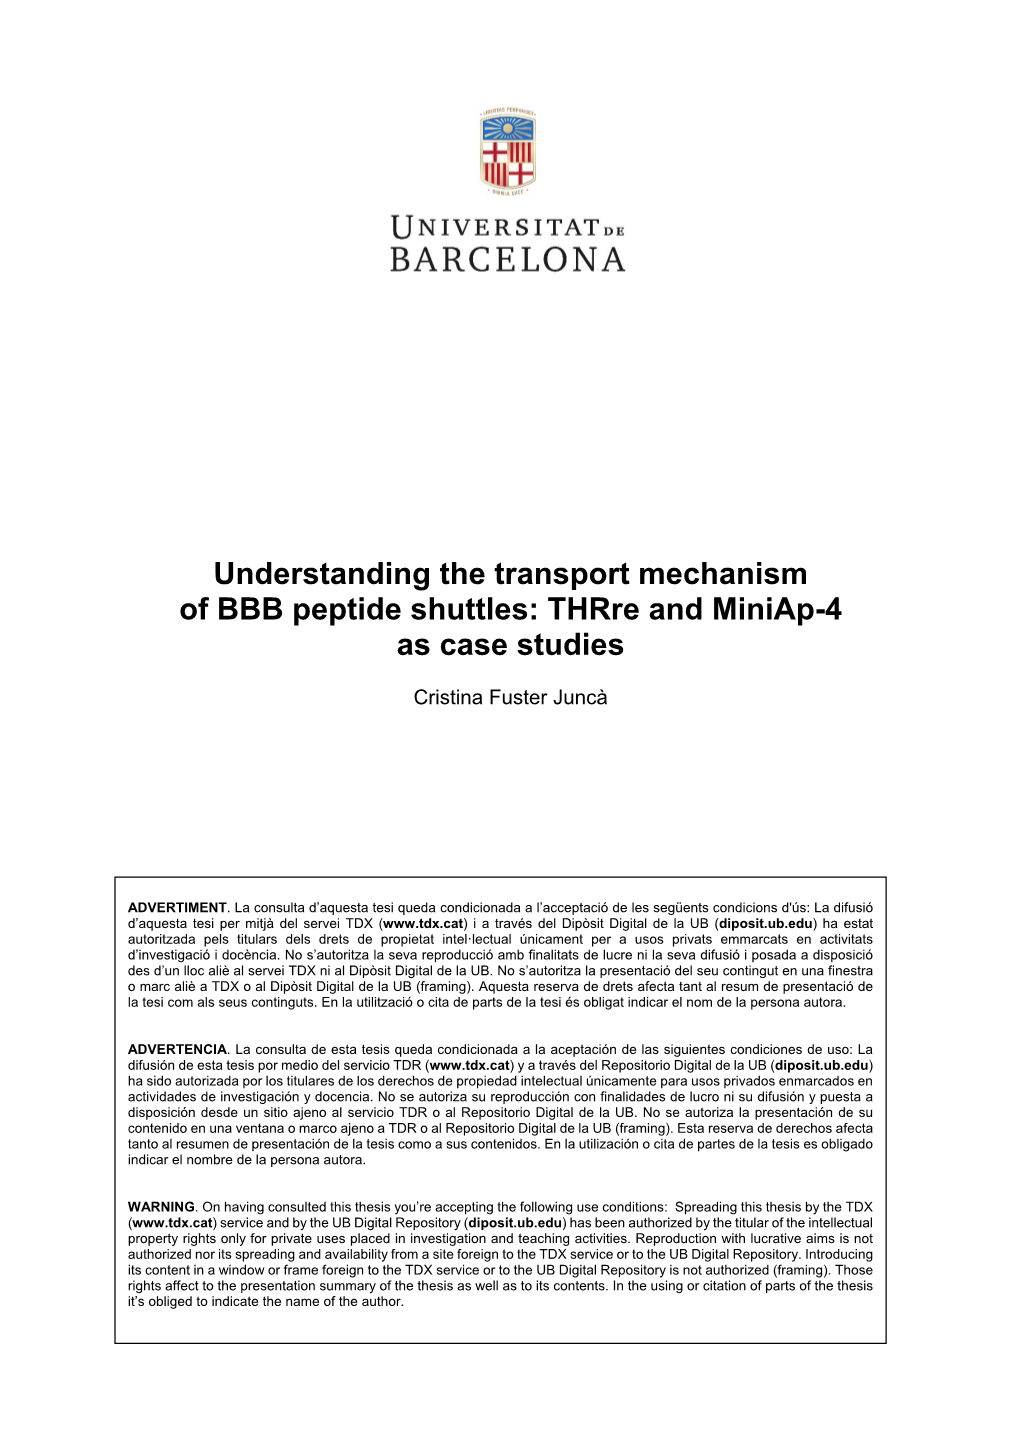 Understanding the Transport Mechanism of BBB Peptide Shuttles: Thrre and Miniap-4 As Case Studies